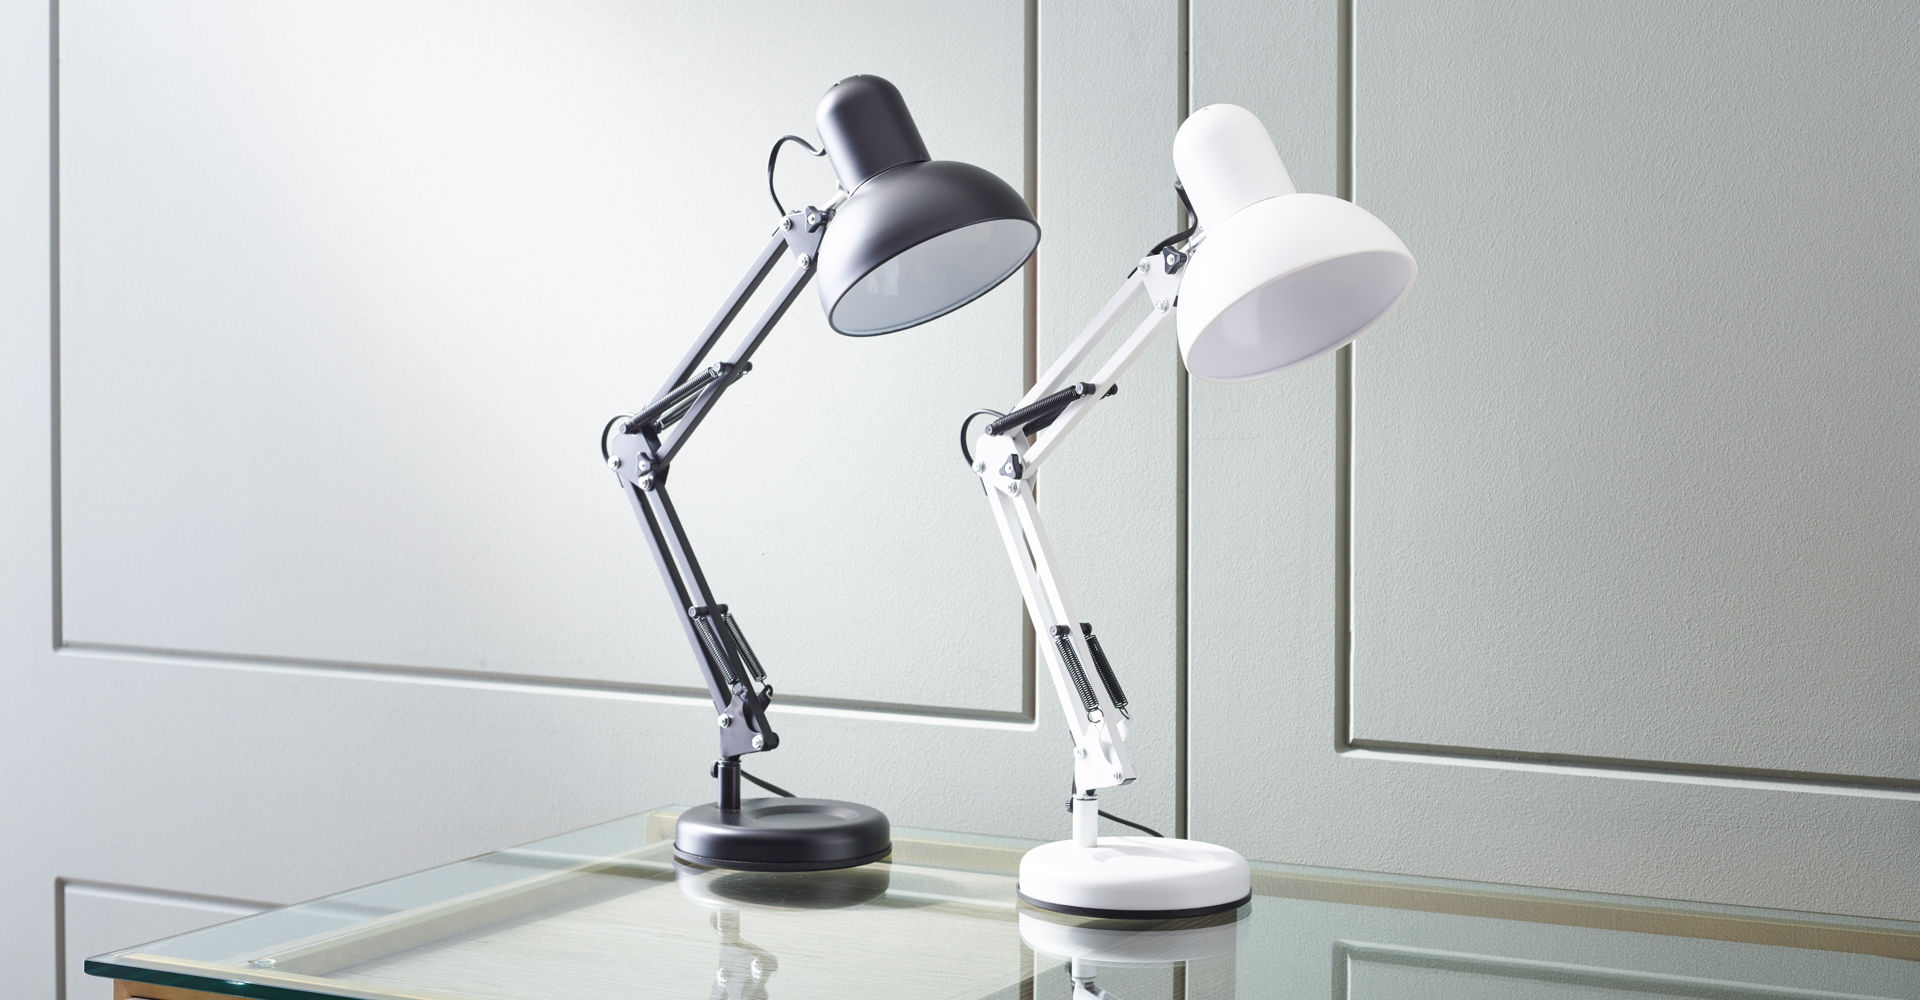 Accessories Adjustable Stanley Lamps In Black & White by Gillmore @ GillmoreSPACE Ltd